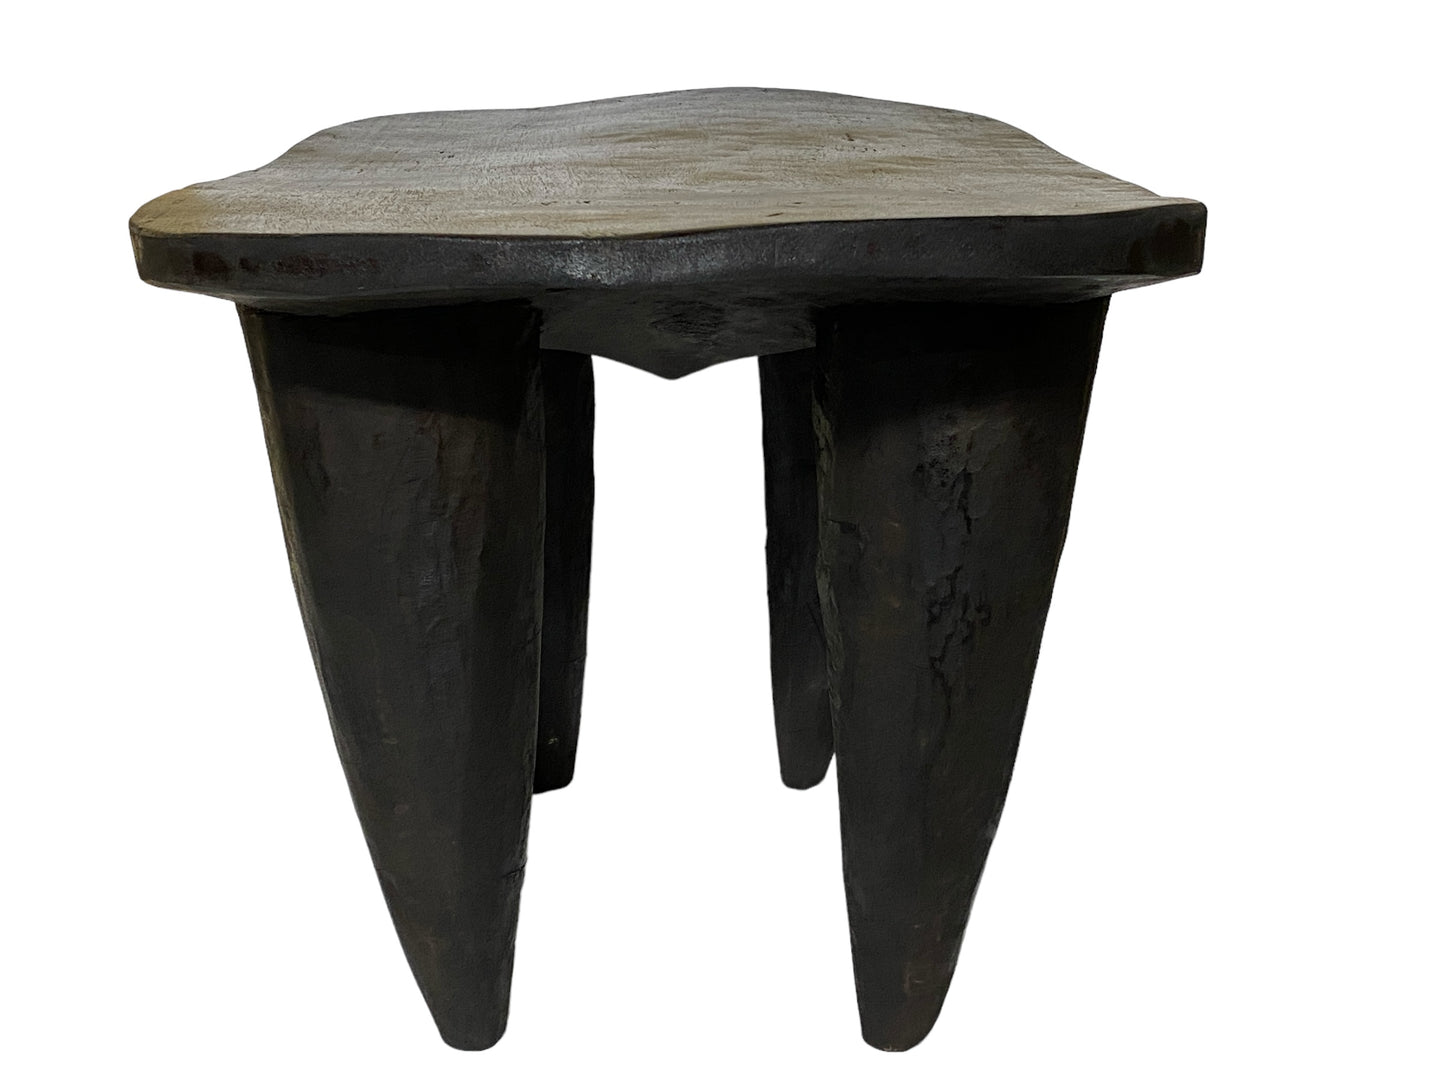 # 5916 African Carved Wood Senufo Table/Stool 27" W